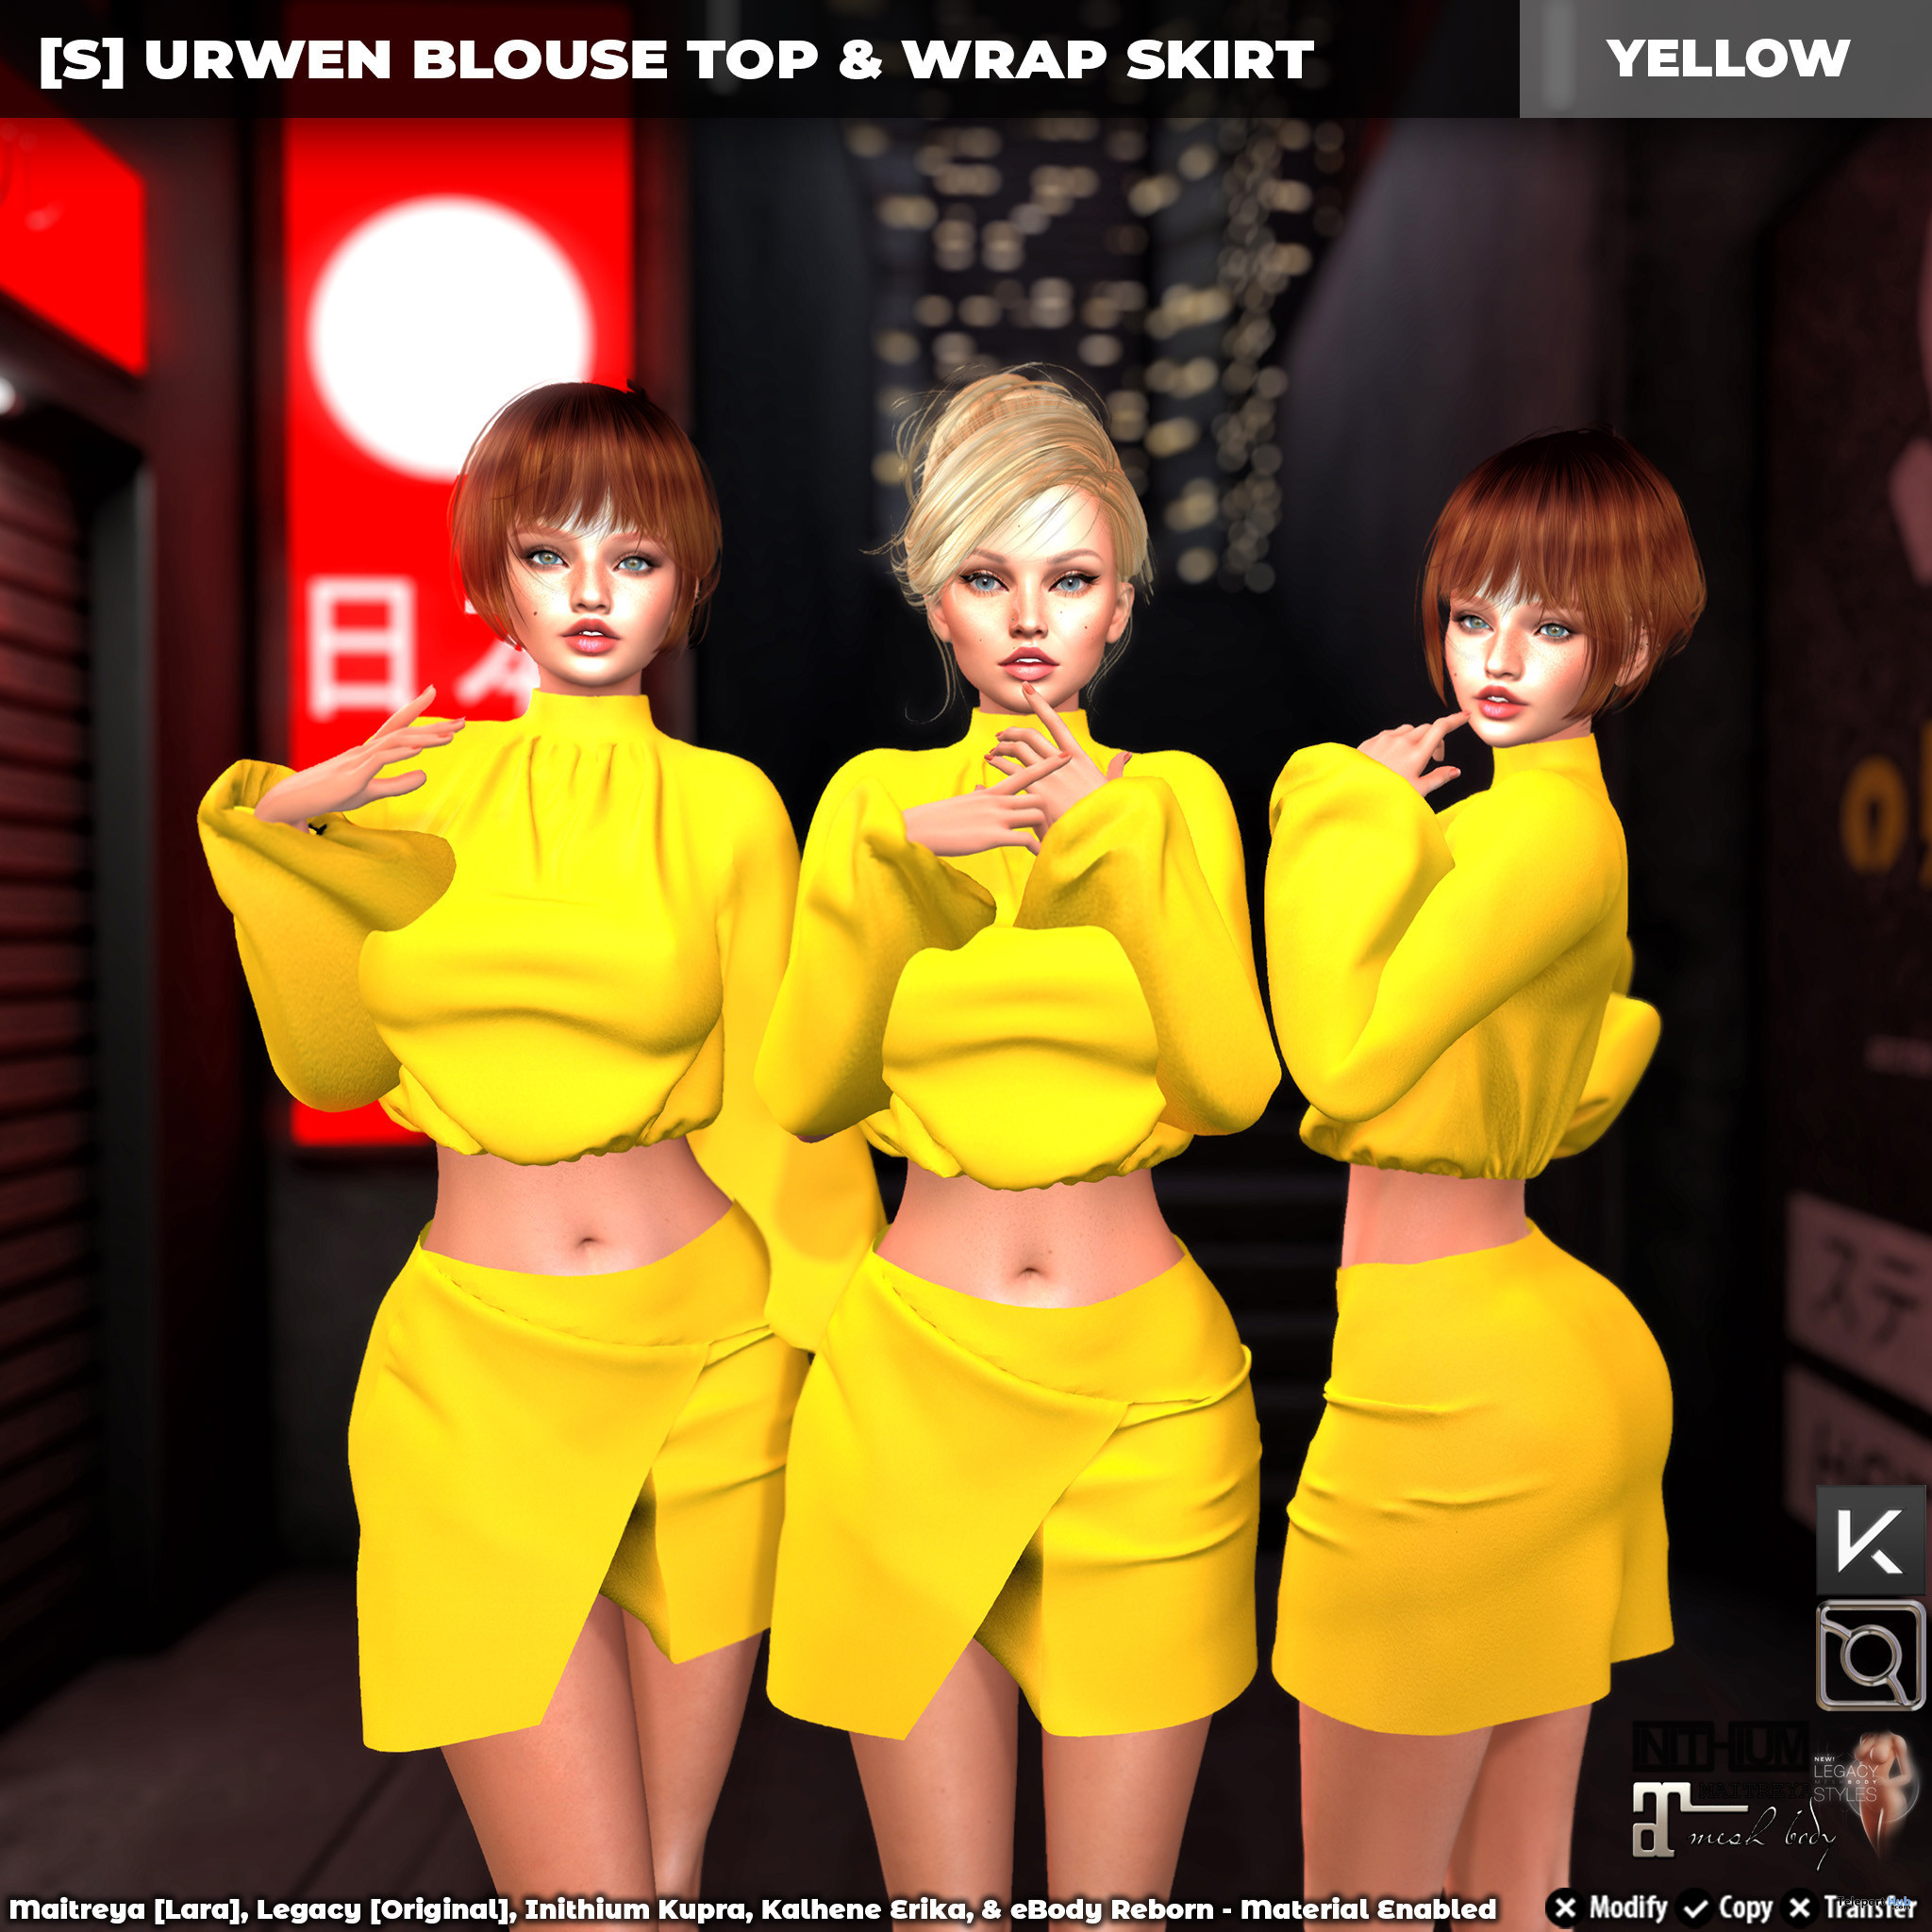 New Release: [S] Urwen Blouse Top & Wrap Skirt by [satus Inc] - Teleport Hub - teleporthub.com